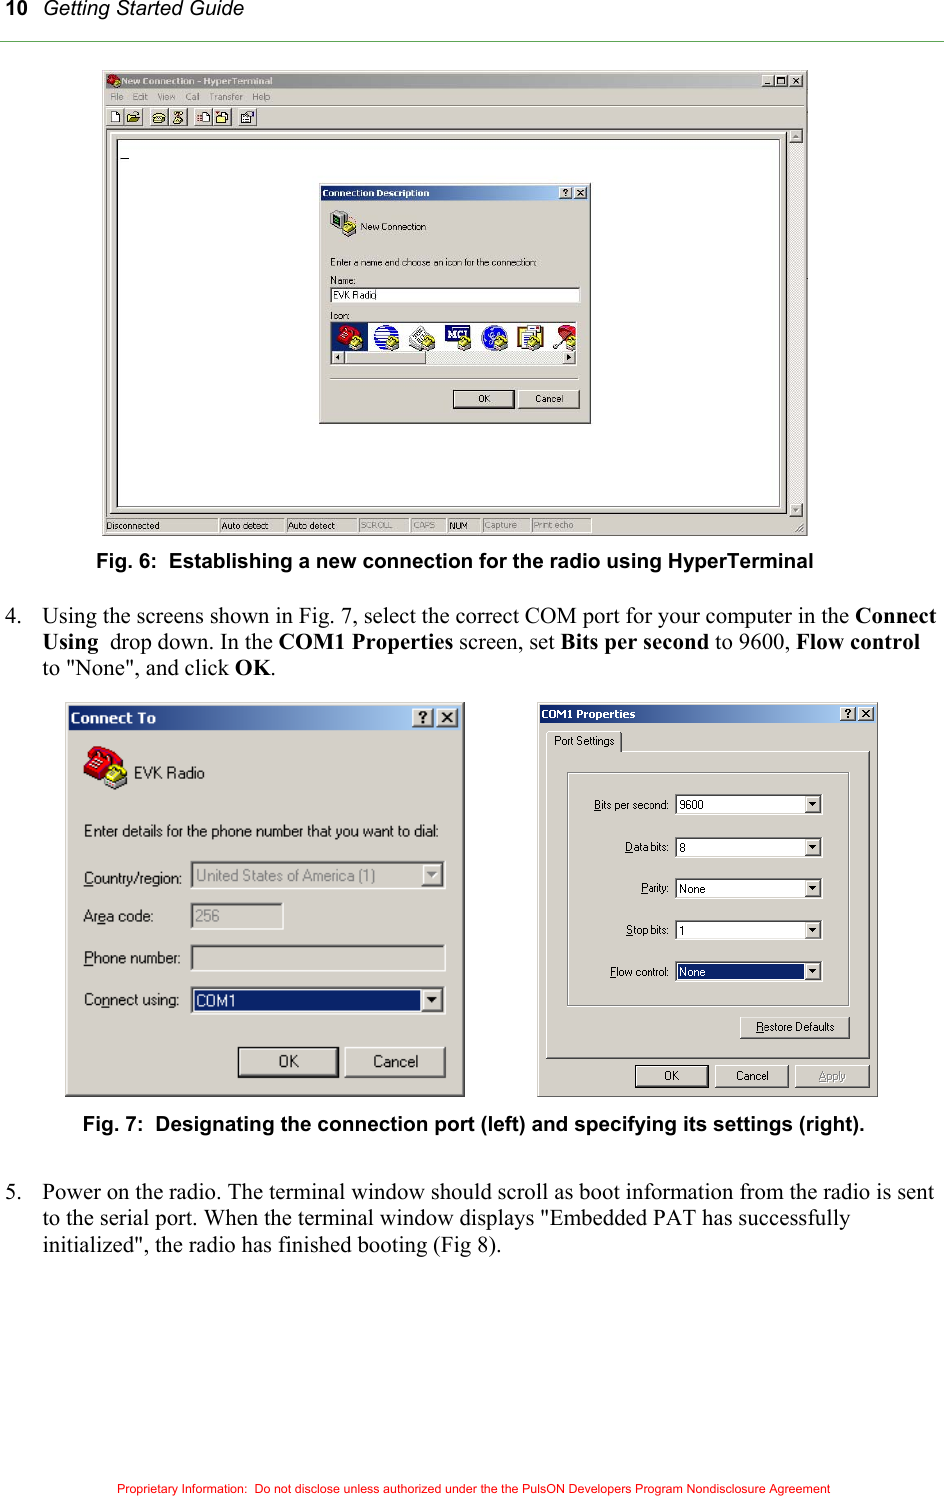 Getting Started Guide 10 Fig. 6:  Establishing a new connection for the radio using HyperTerminal  4.  Using the screens shown in Fig. 7, select the correct COM port for your computer in the Connect Using  drop down. In the COM1 Properties screen, set Bits per second to 9600, Flow control to &quot;None&quot;, and click OK.    Fig. 7:  Designating the connection port (left) and specifying its settings (right).  5.  Power on the radio. The terminal window should scroll as boot information from the radio is sent to the serial port. When the terminal window displays &quot;Embedded PAT has successfully initialized&quot;, the radio has finished booting (Fig 8).       Proprietary Information:  Do not disclose unless authorized under the the PulsON Developers Program Nondisclosure Agreement 